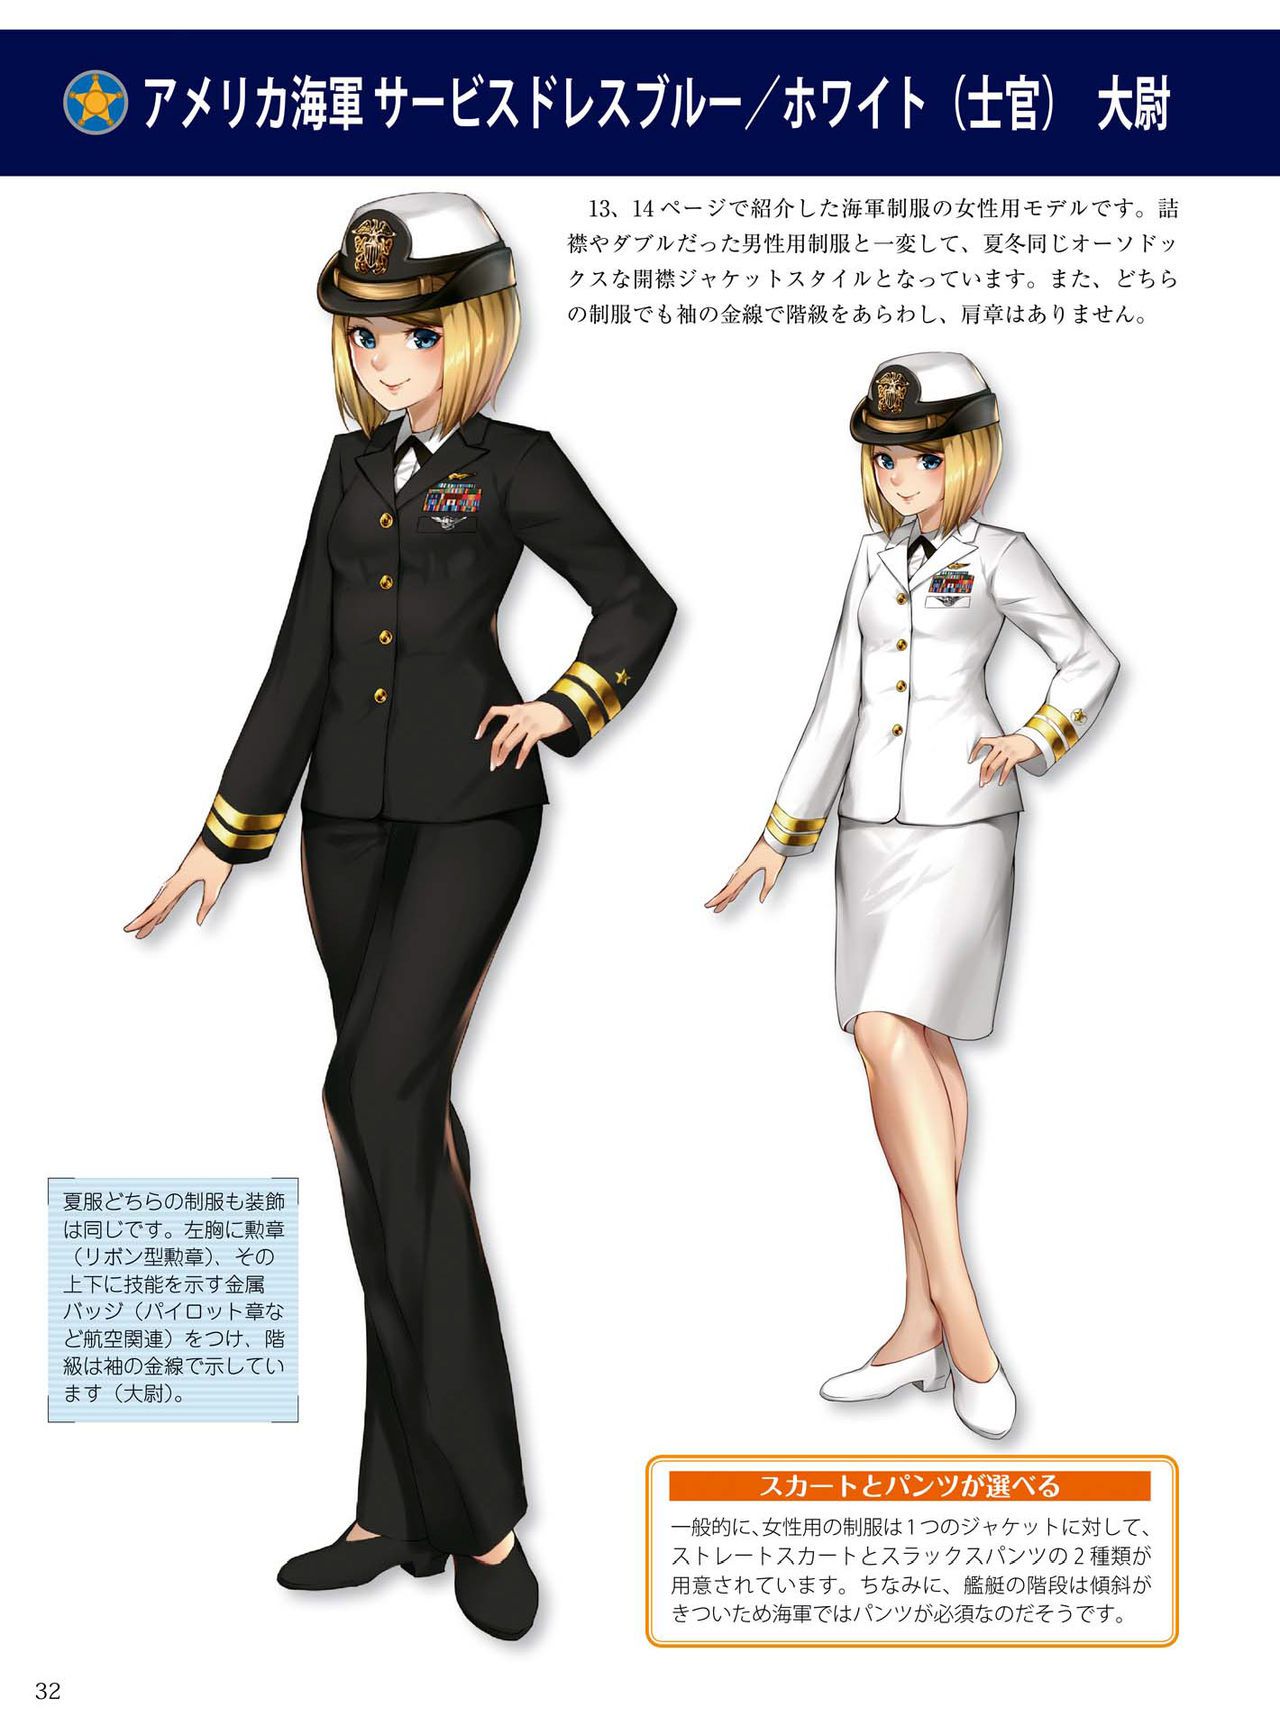 How to draw military uniforms and uniforms From Self-Defense Forces 軍服・制服の描き方 アメリカ軍・自衛隊の制服から戦闘服まで 35